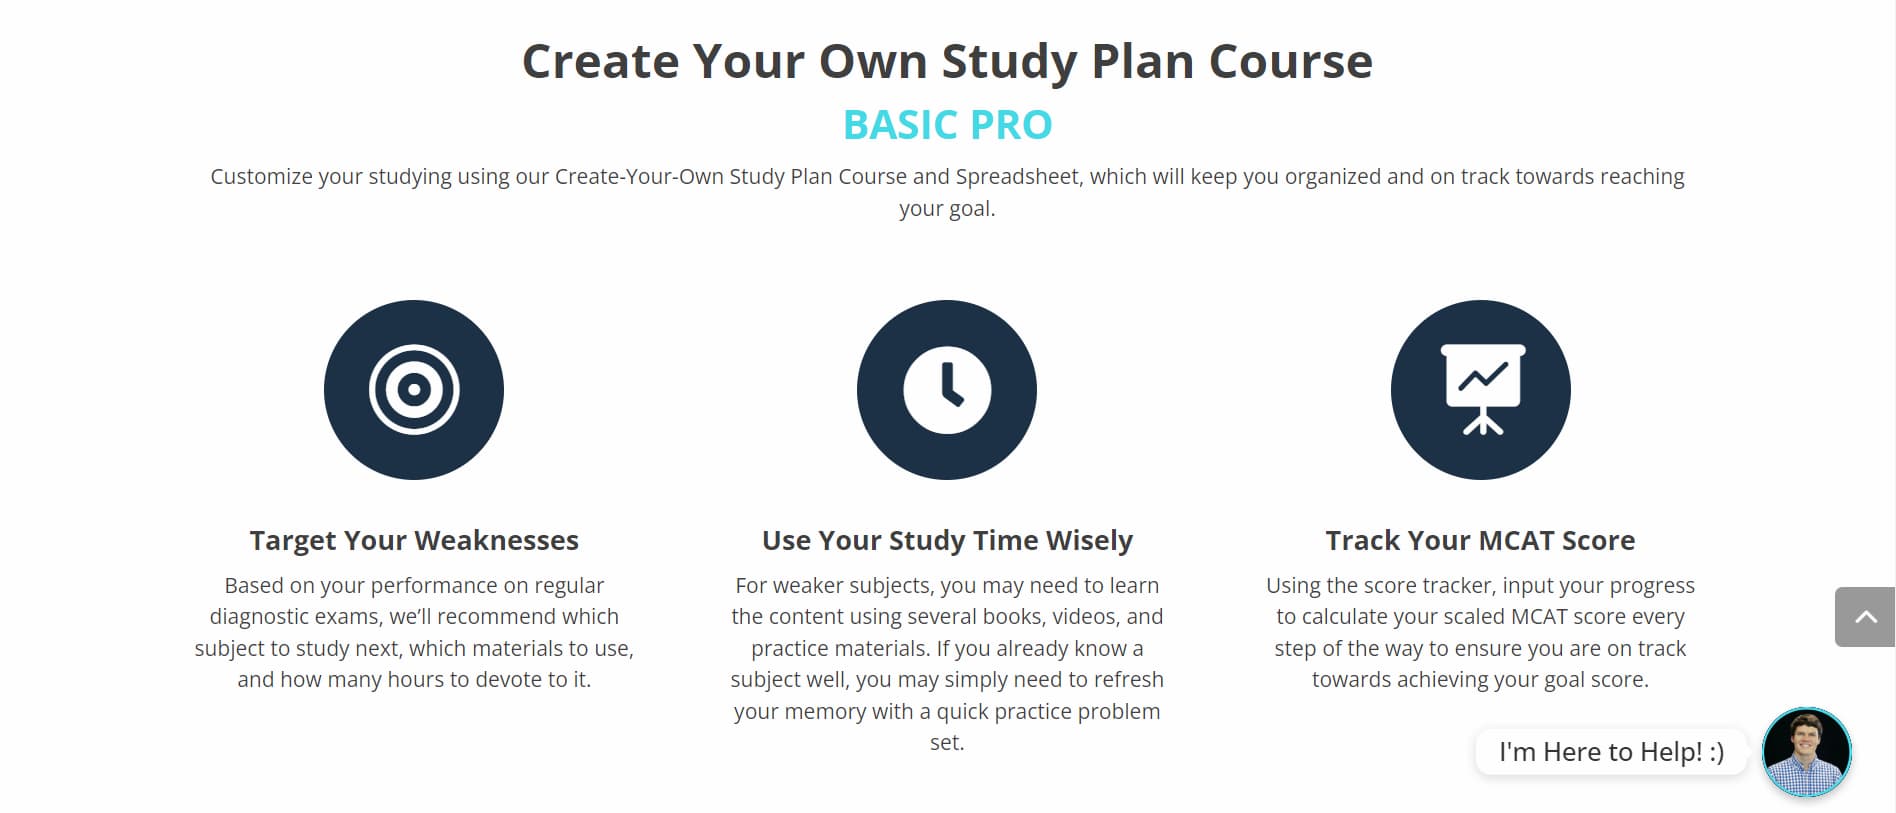 Your own study plan course